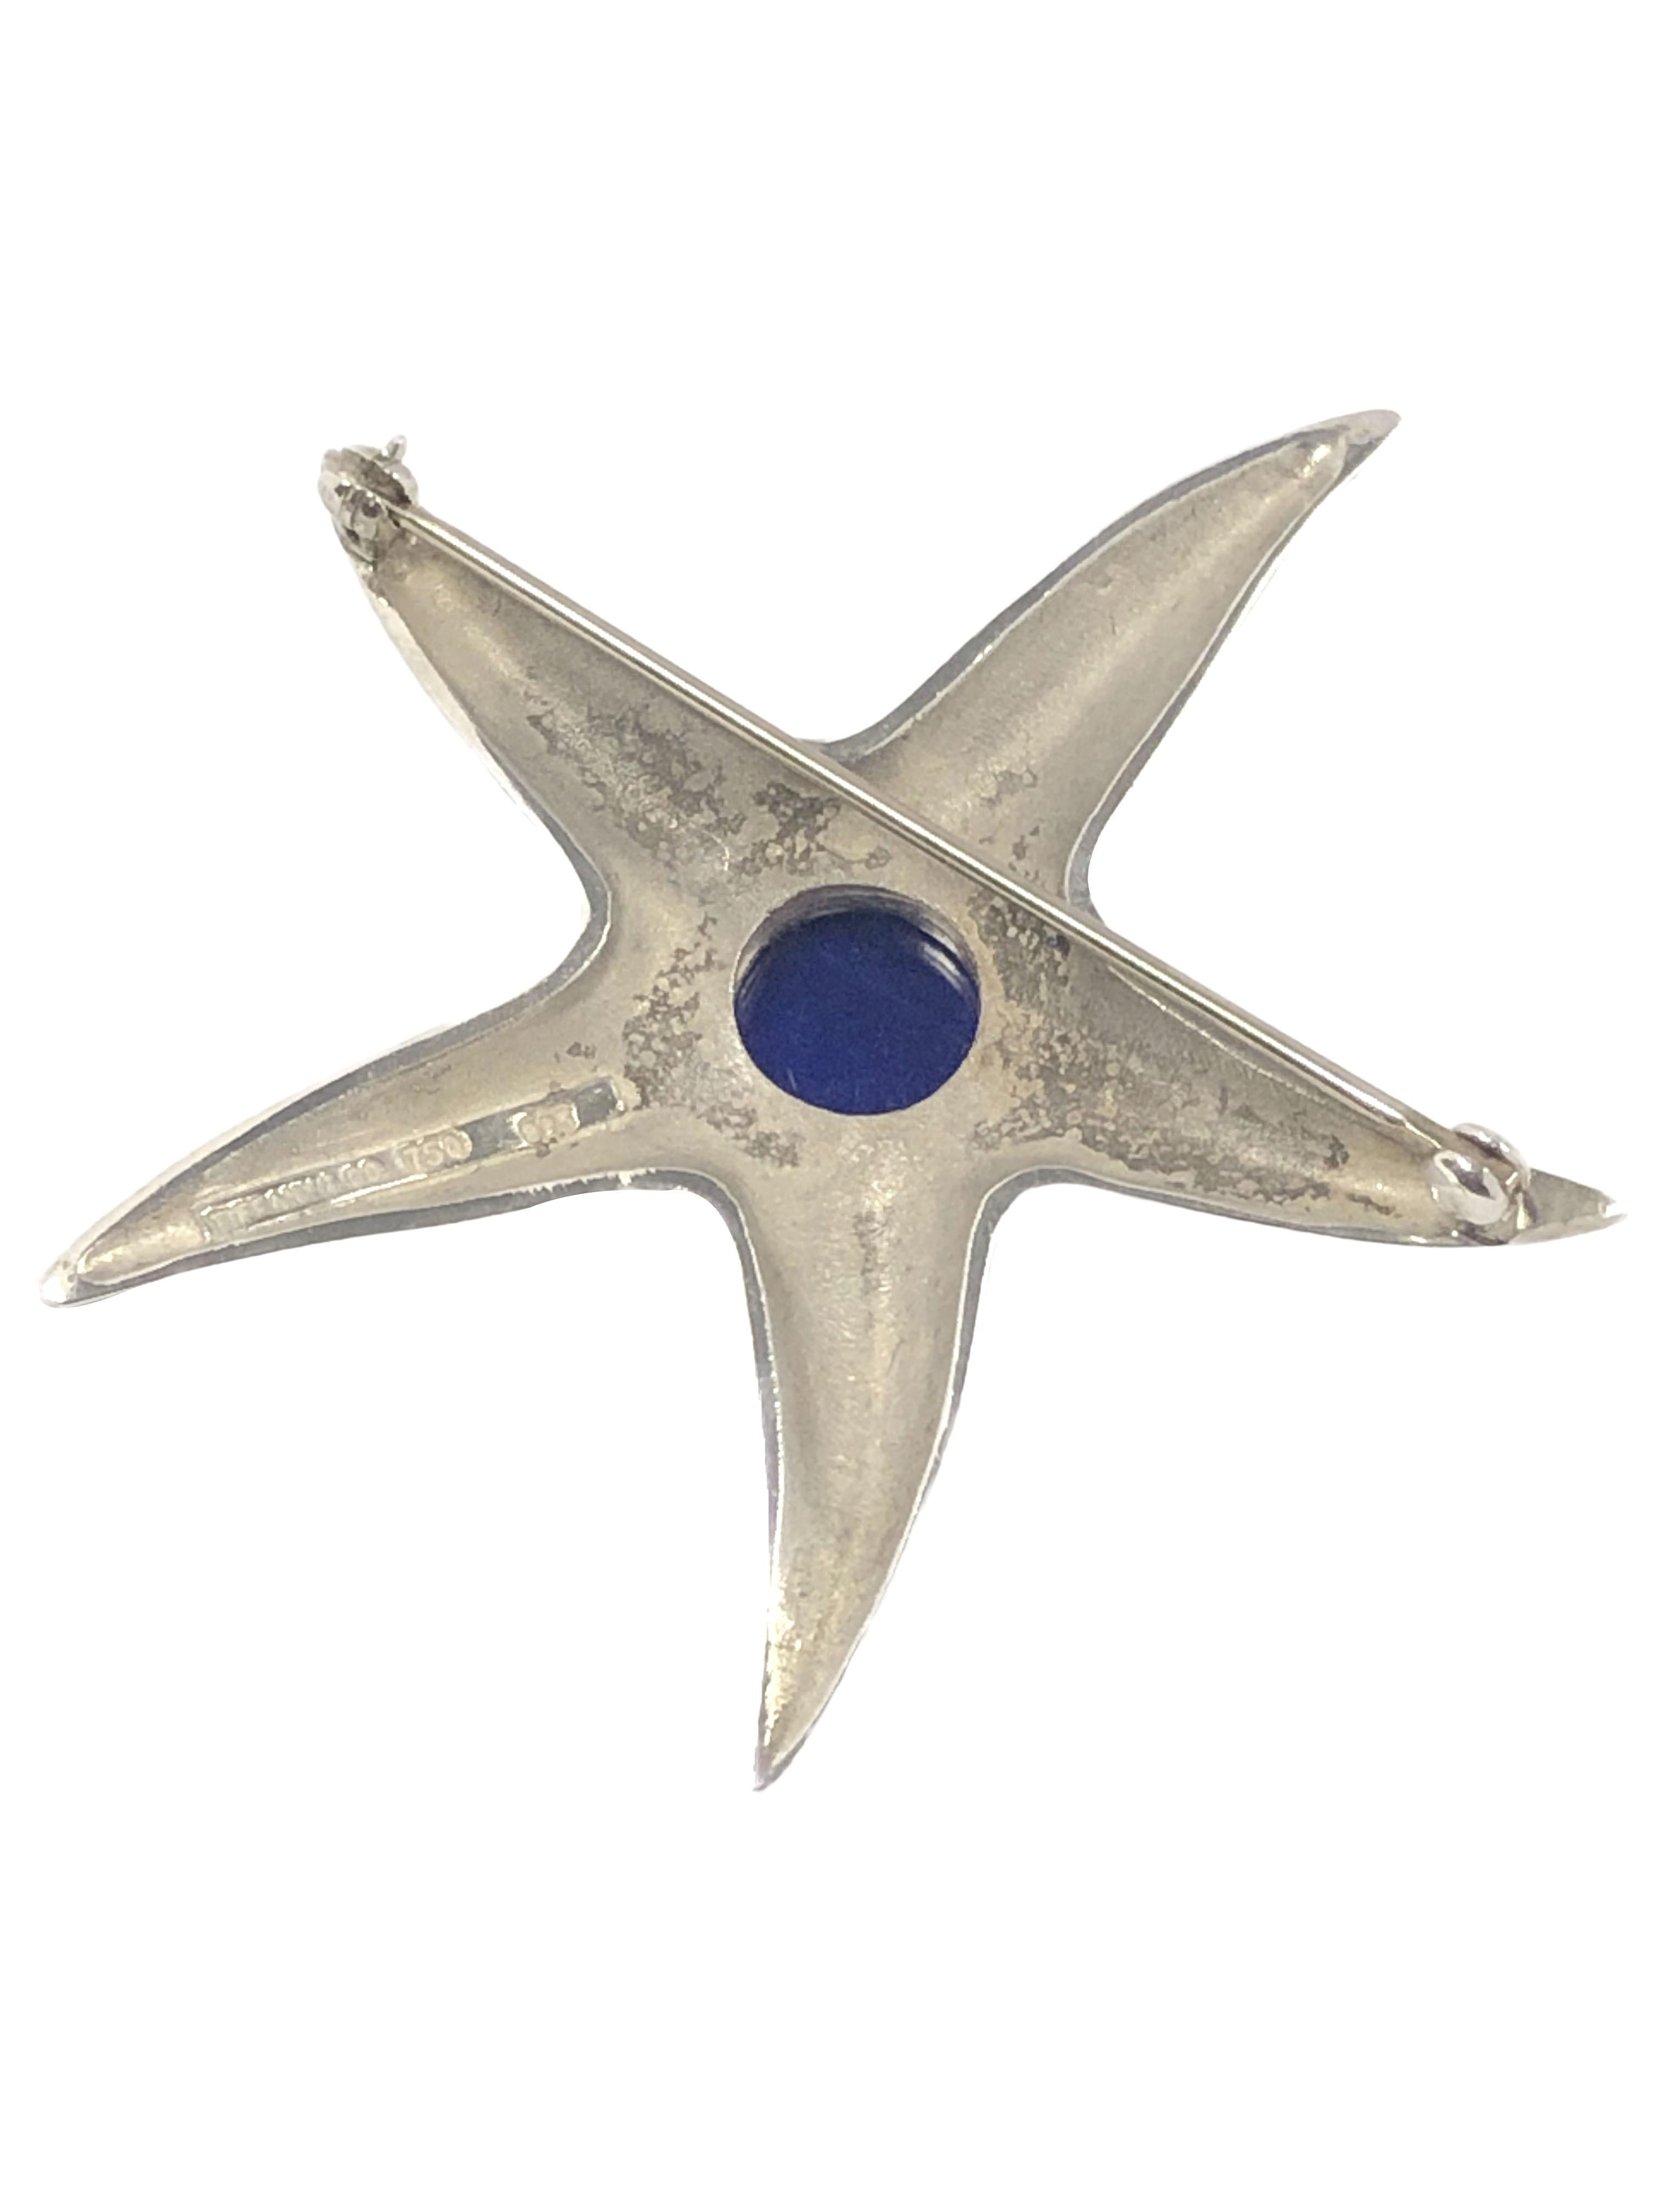 Circa 1990 Tiffany & Company Sterling Silver Starfish Brooch, measuring 2 inches in diameter, an 18k Yellow Gold bezel set with a Lapis Lazuli. Comes in original Gift Box.